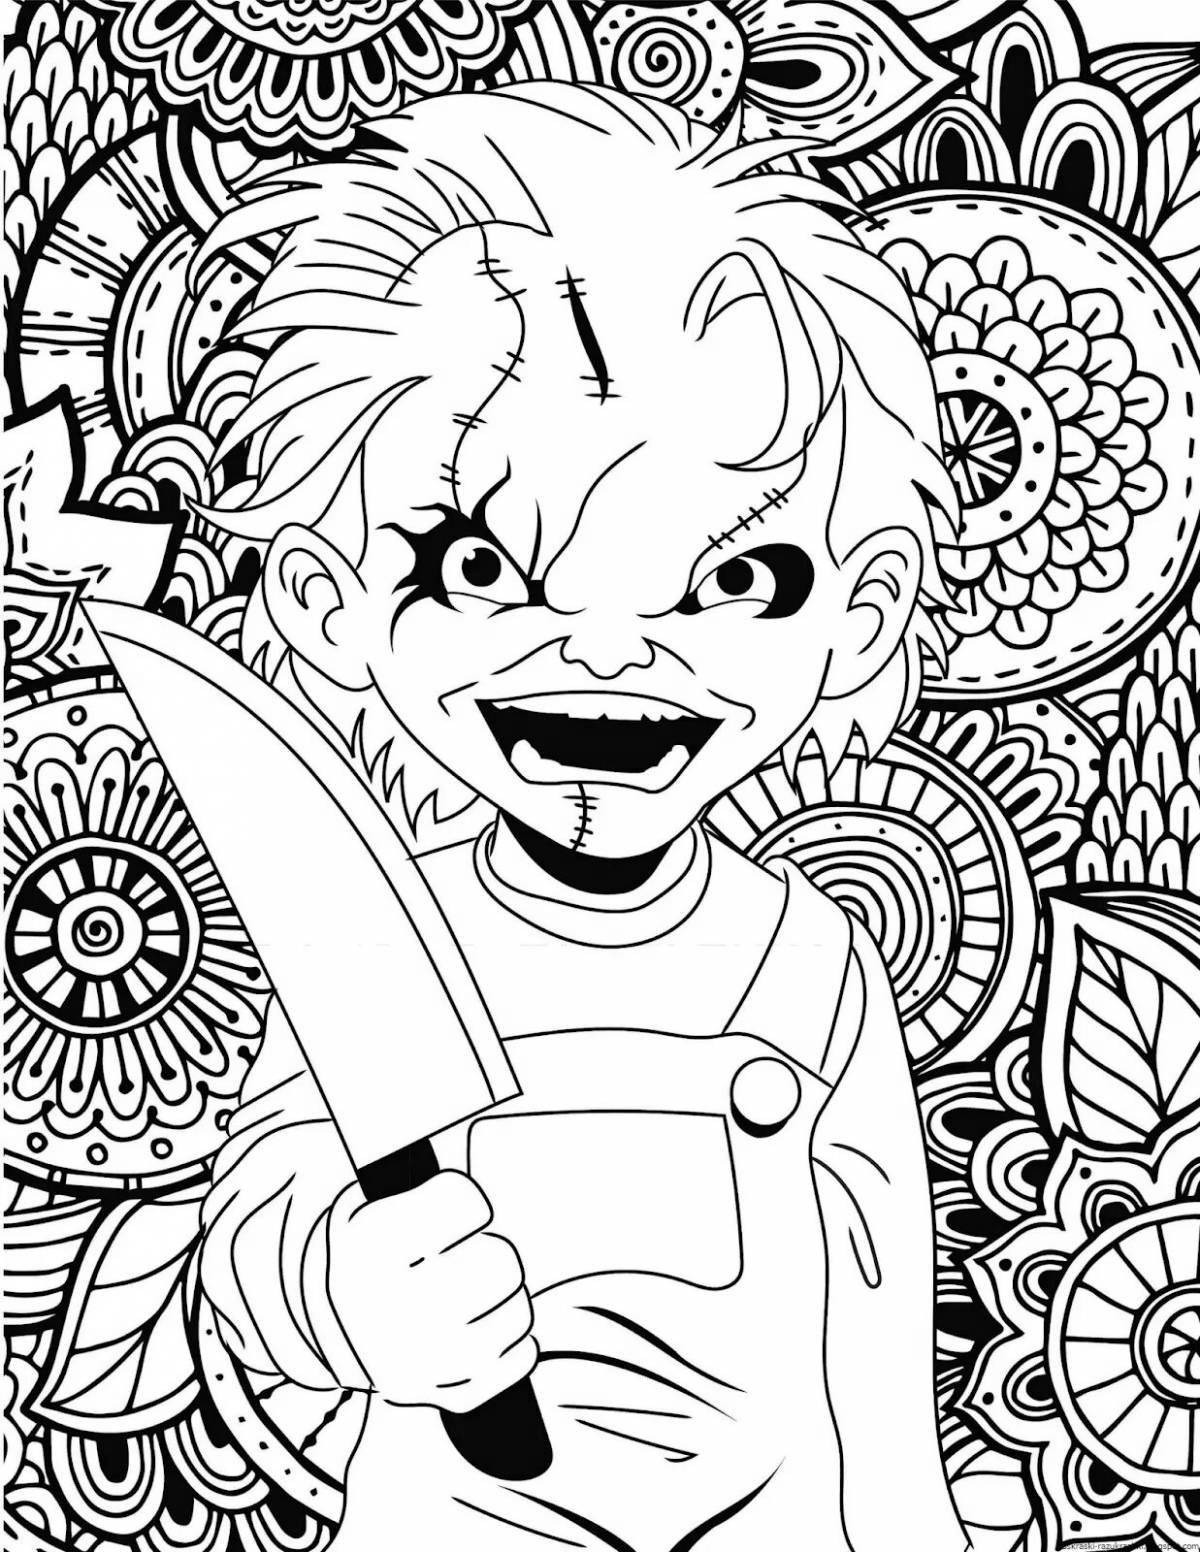 Amazing coloring pages for teens